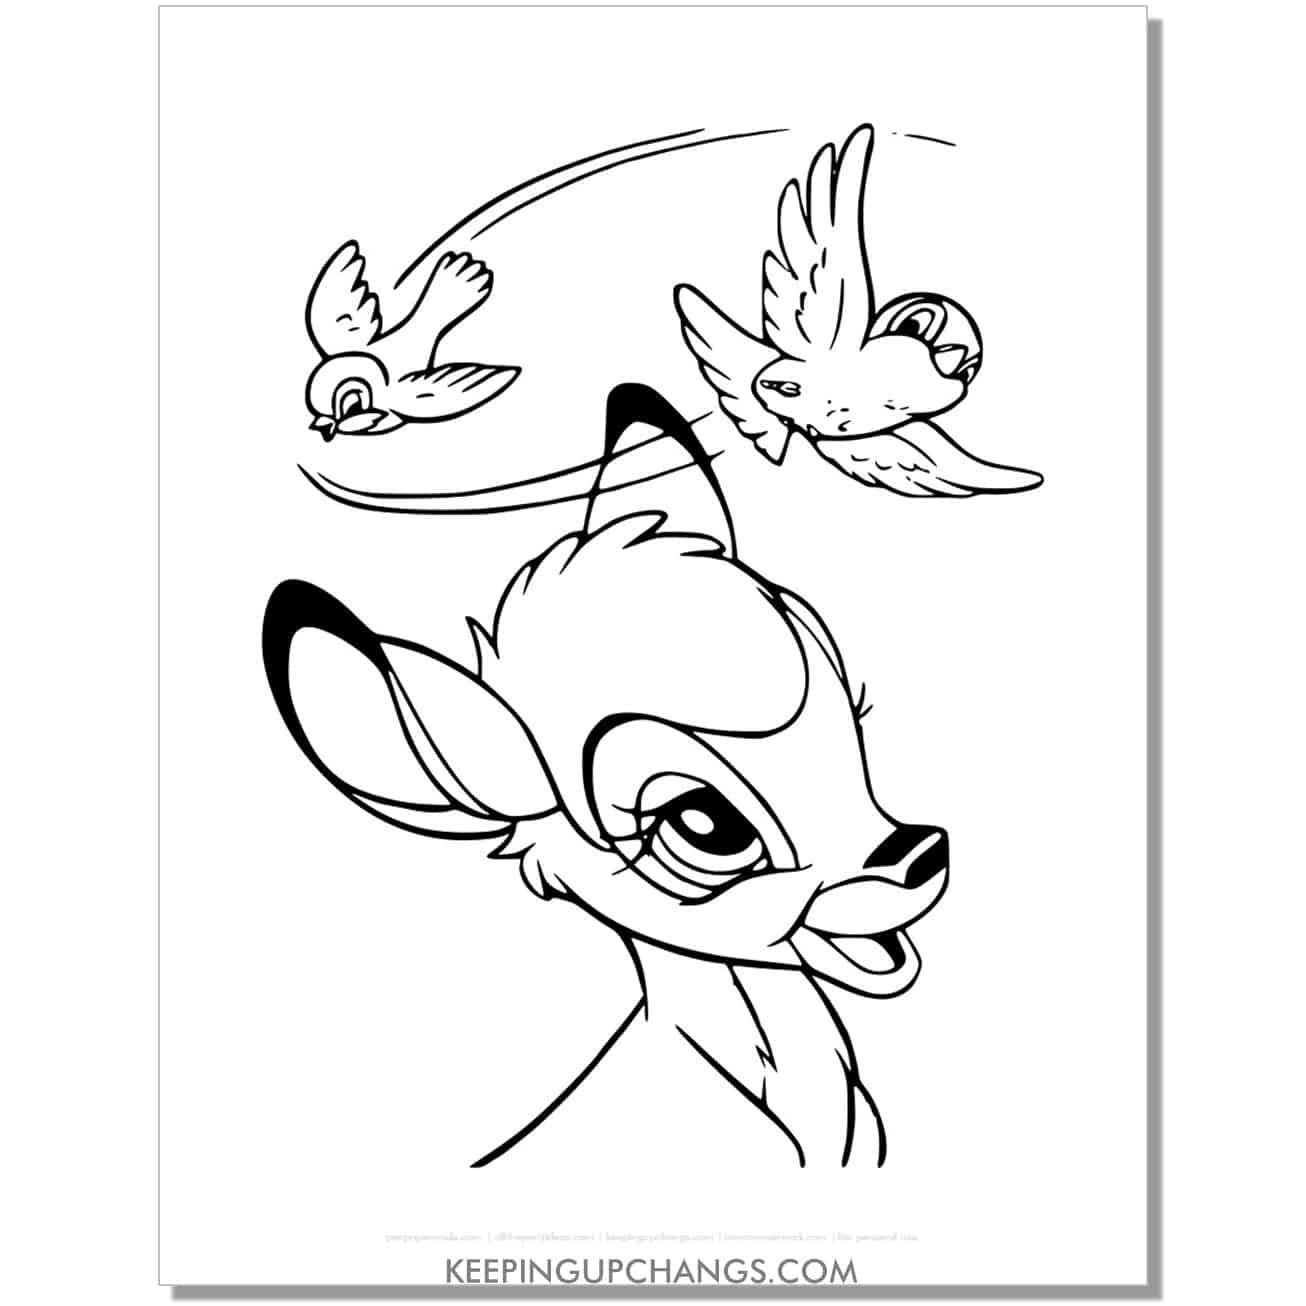 free birds flying above bambi's head coloring page, sheet.